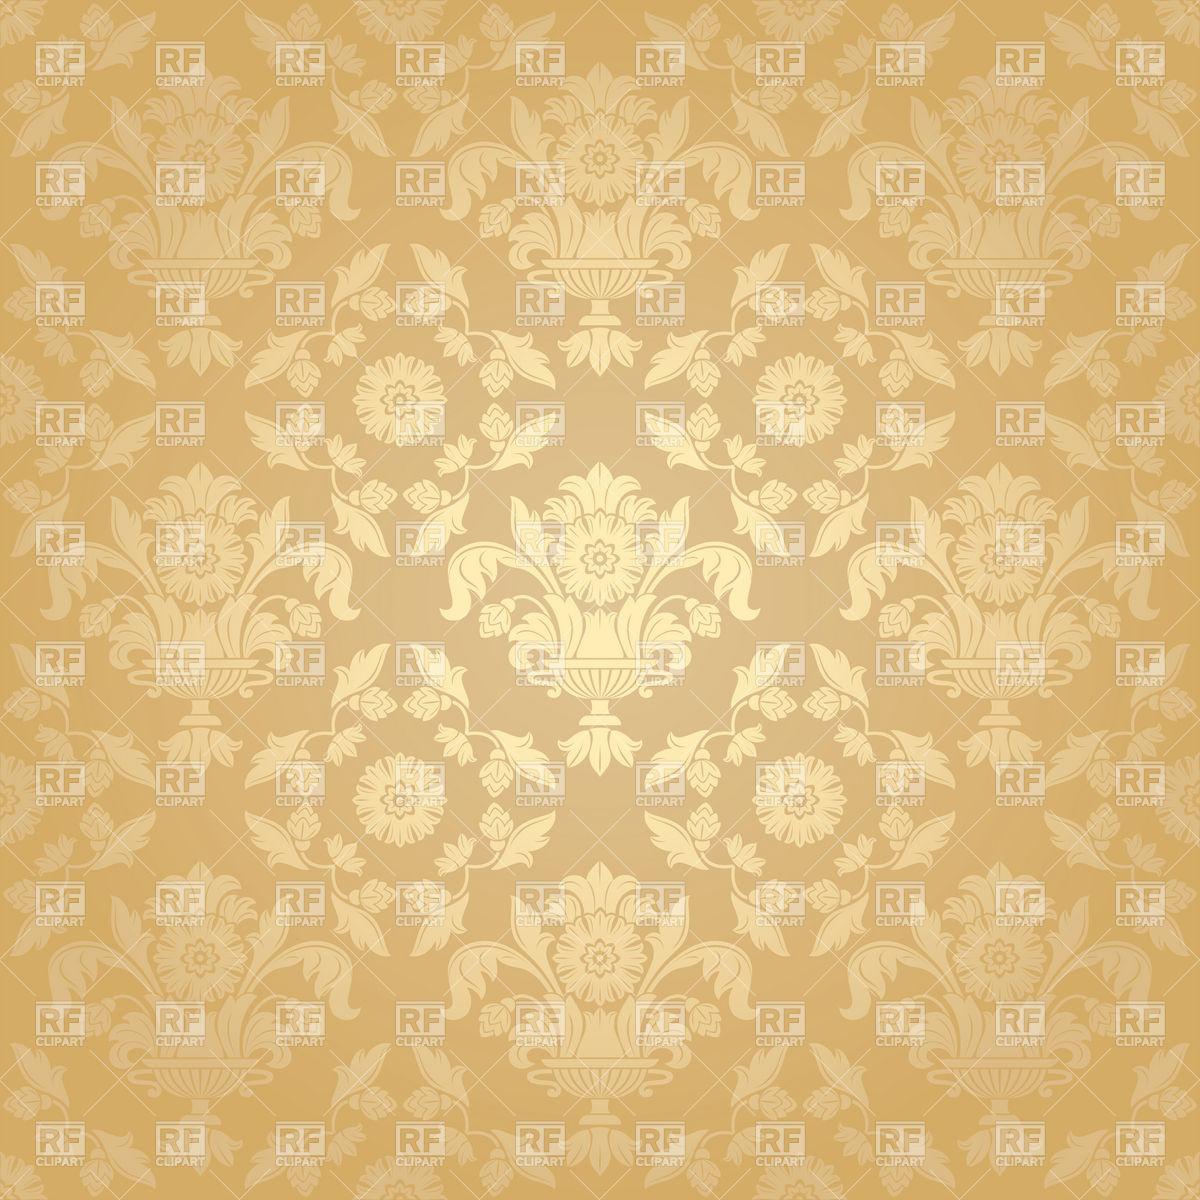 Beige Victorian With Floral Pattern PPT Backgrounds